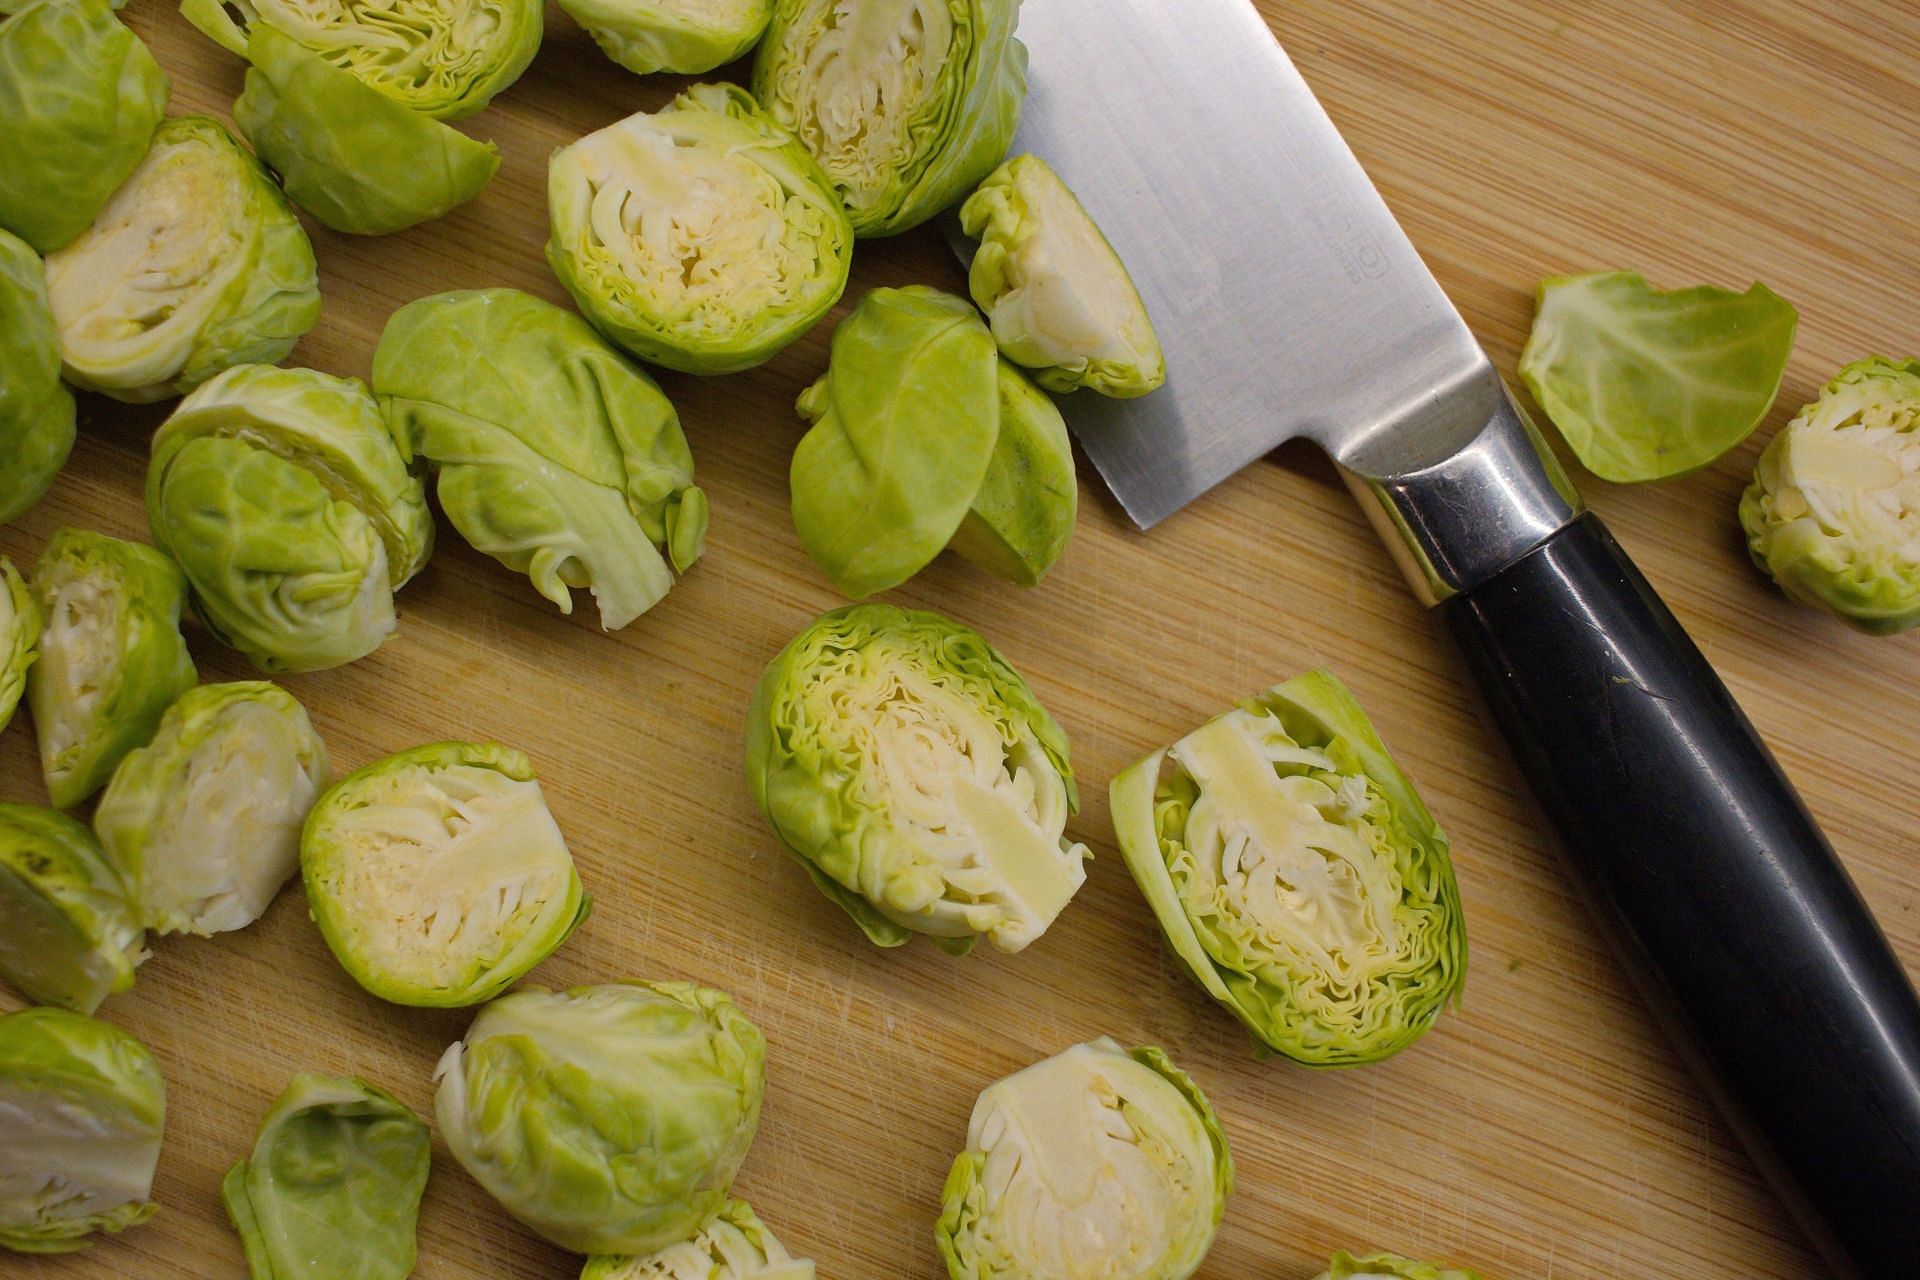 Brussels sprouts are a nutritious and healthy vegetable. (Photo via Pexels/Damir Mijailovic)